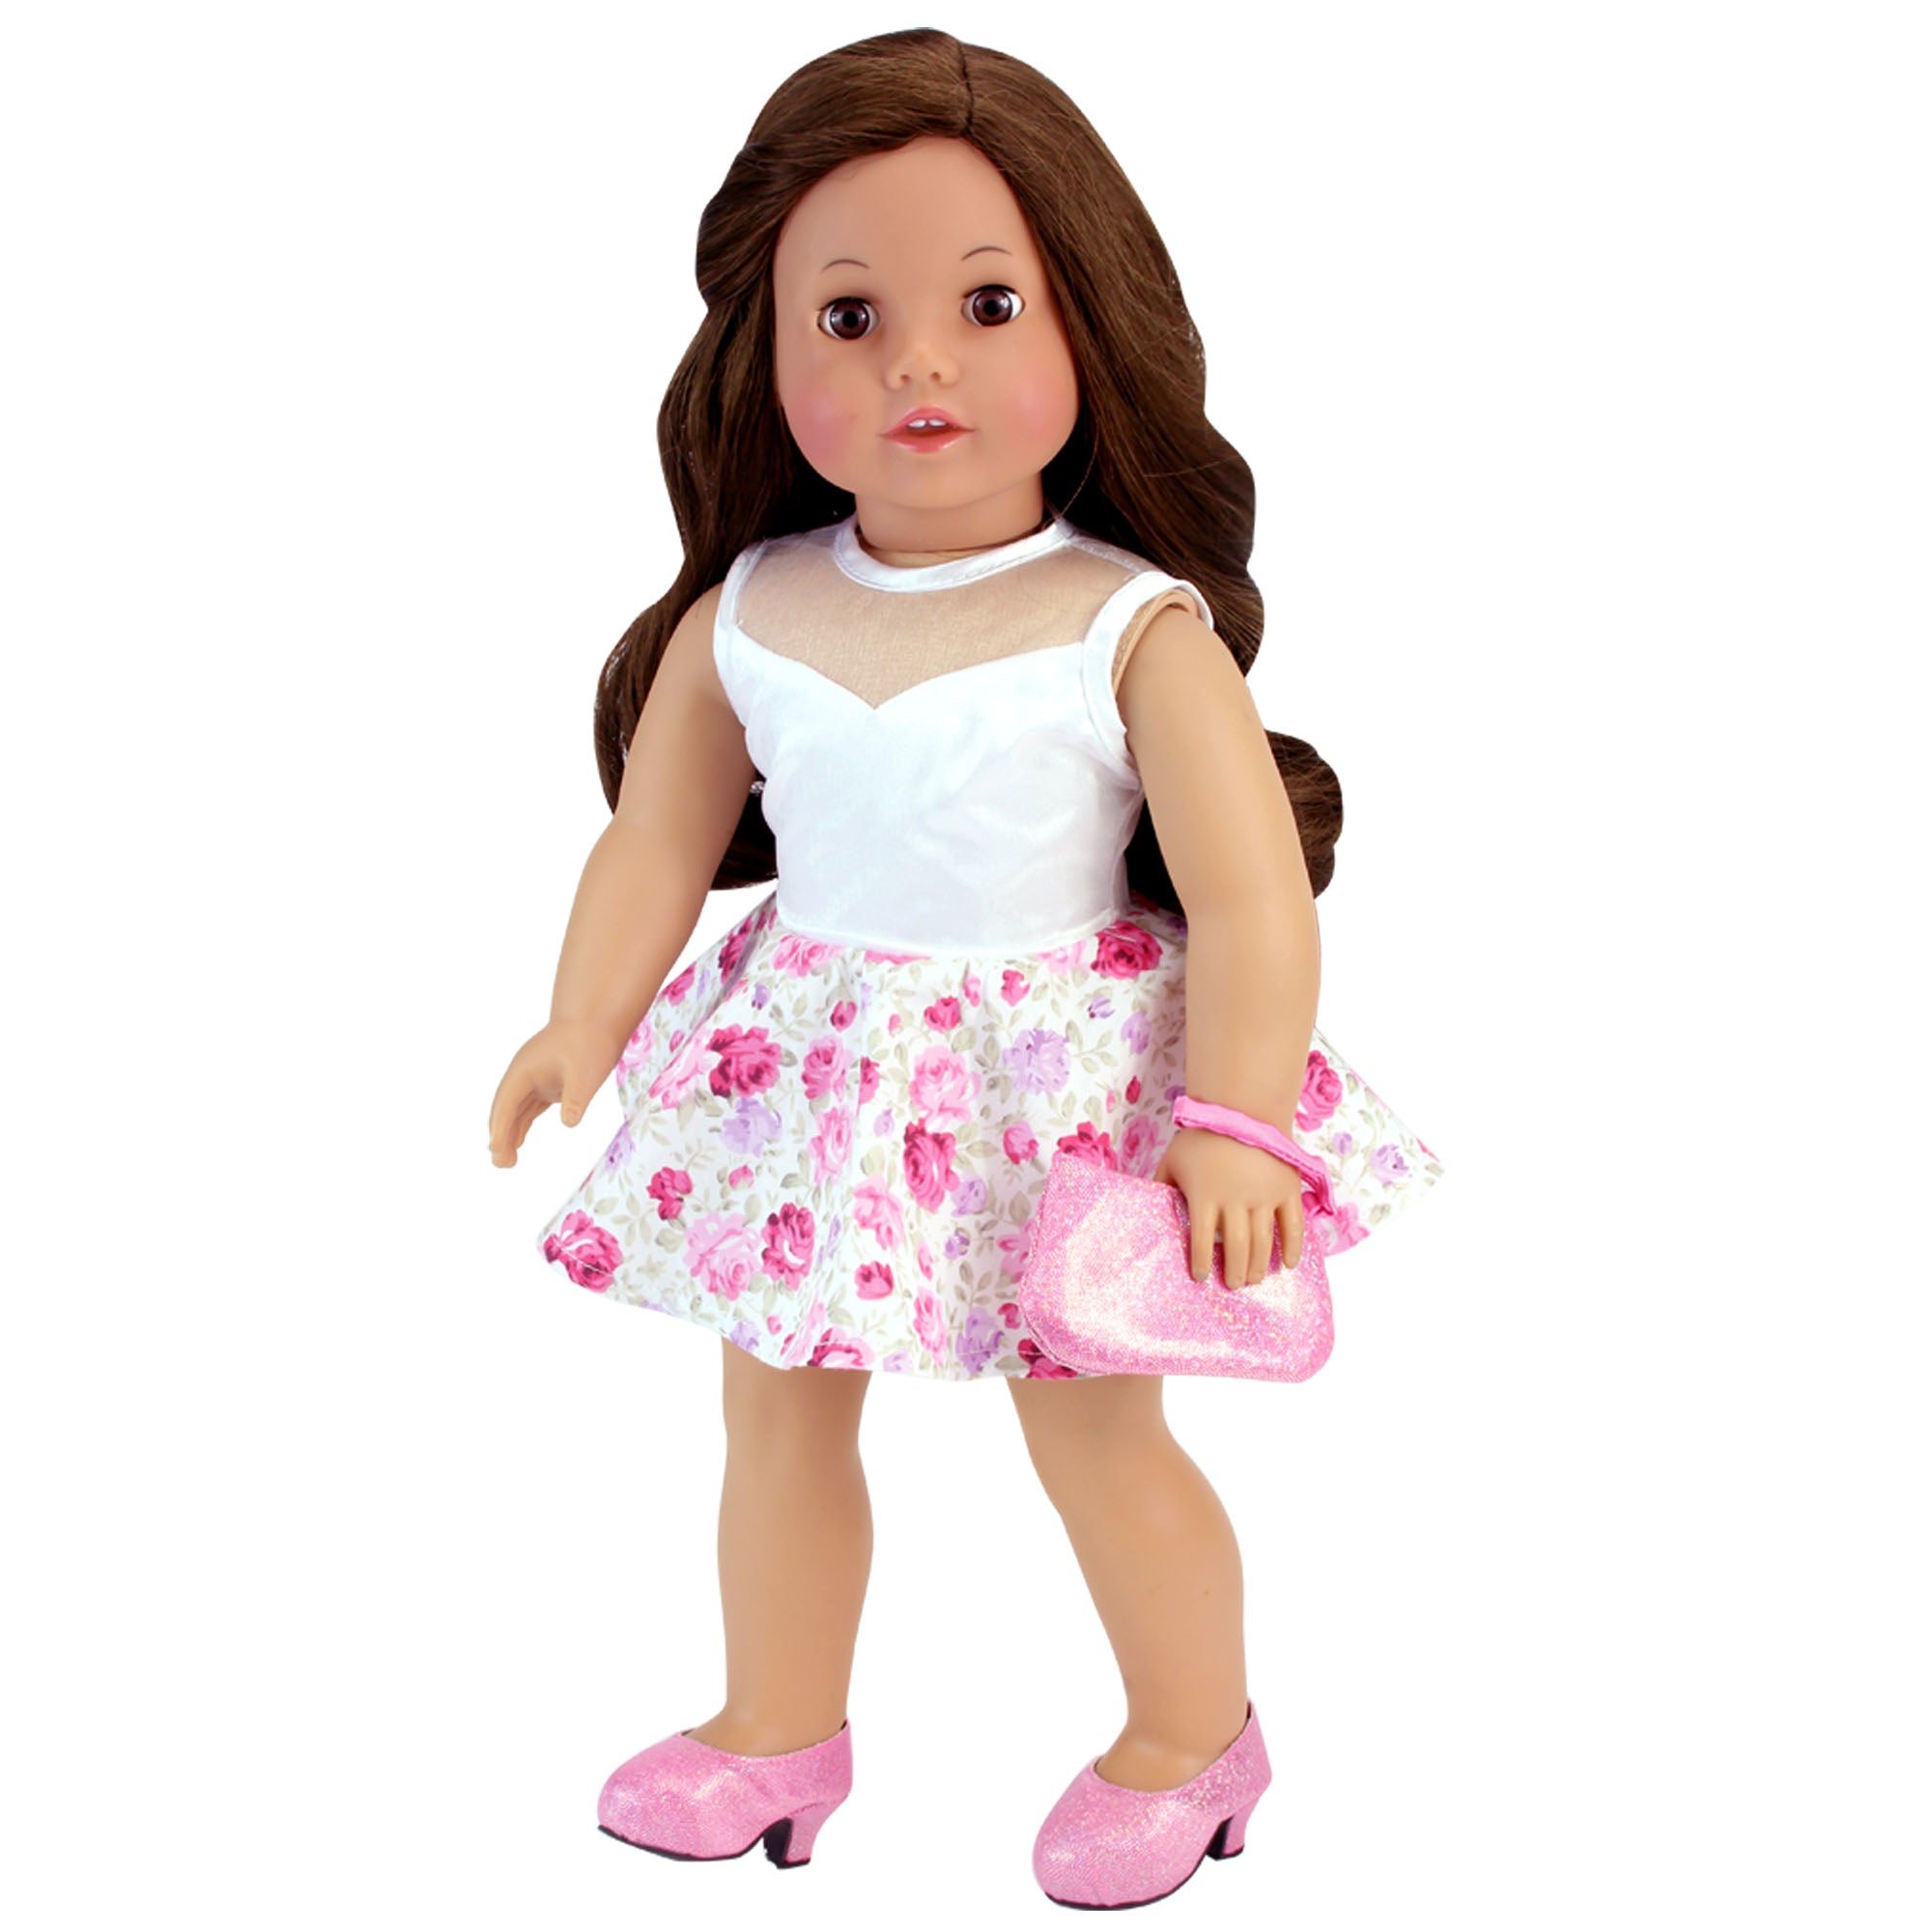 Sophia’s Floral Spring Dance Dress, Wristlet Purse, & Sparkly High Heels Complete Outfit Set for 18” Dolls, White